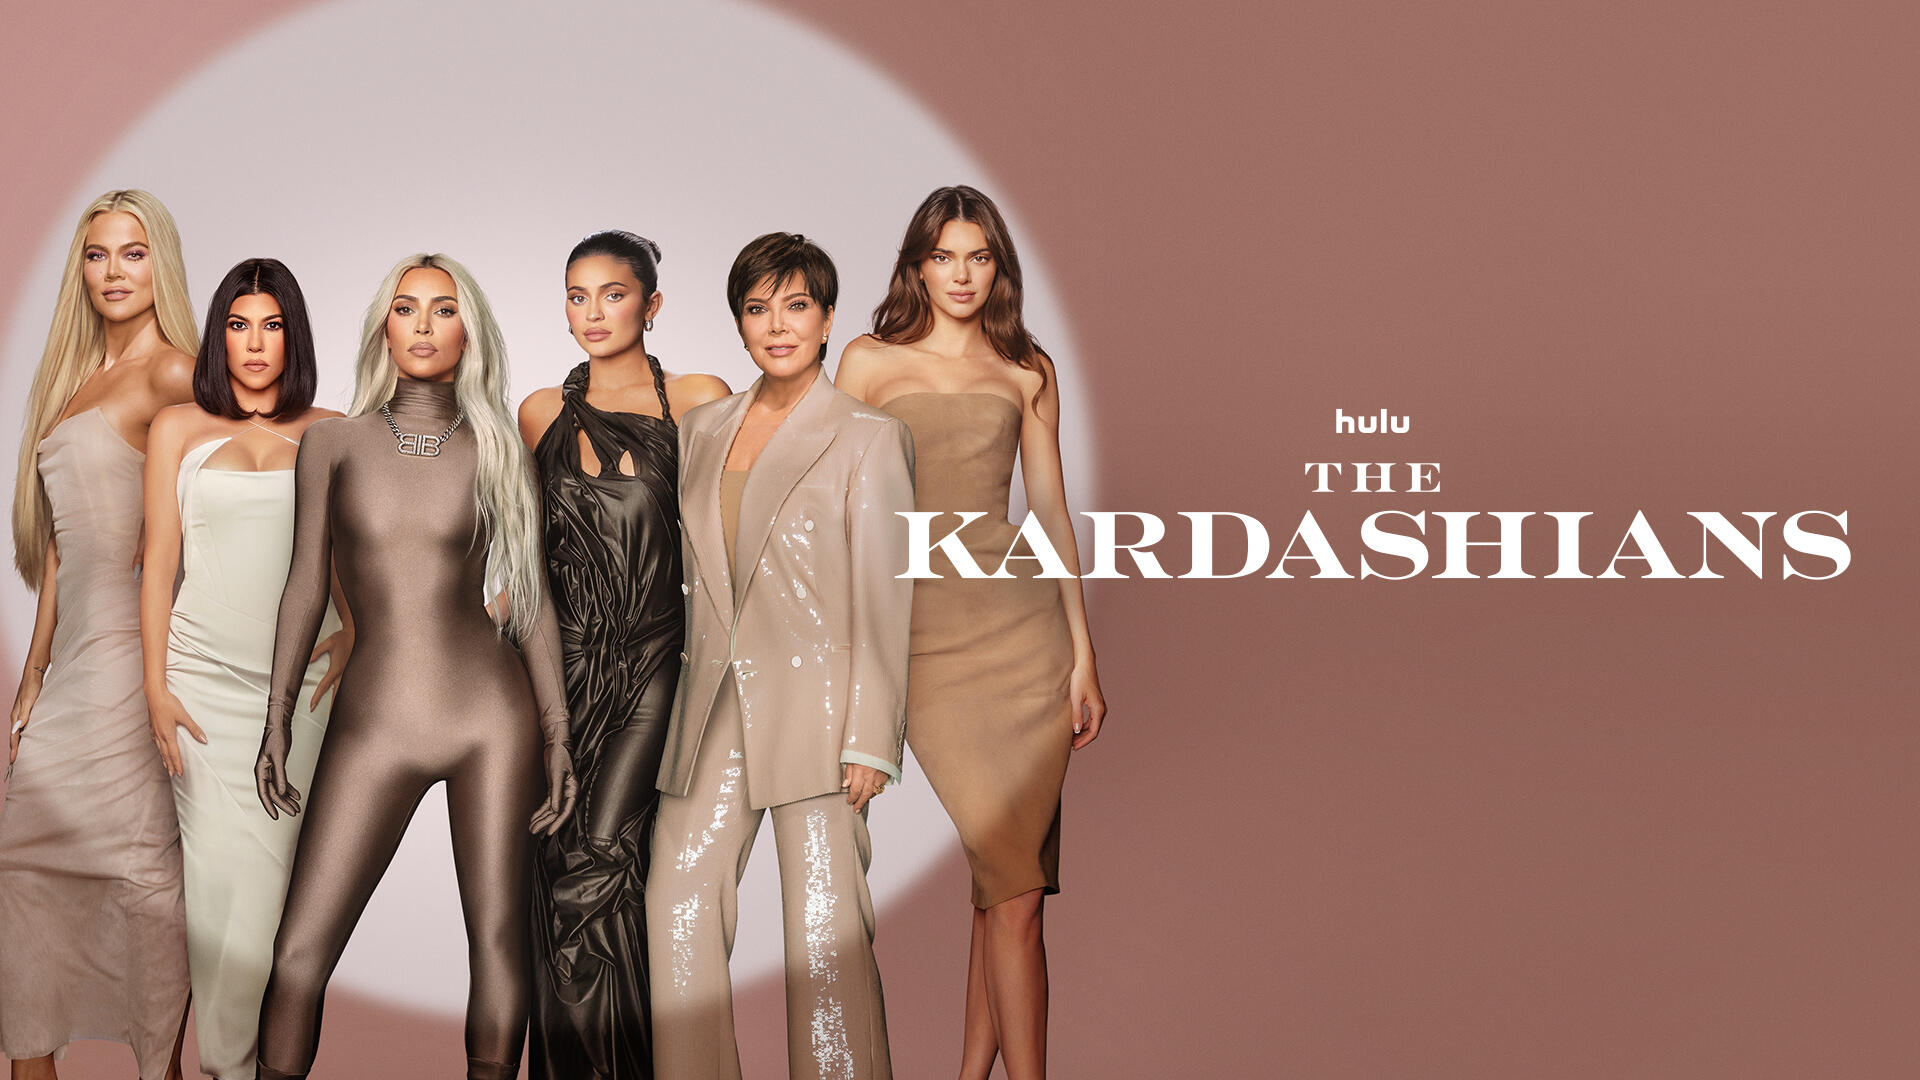 The Kardashians -- Season 4 -- The cameras are back with all access to the personal and private lives of Kris, Kourtney, Kim, Khloé, Kendall and Kylie. From second chances and new beginnings to unexpected blessings, they continue to bare it all together, a reminder that the most beautiful part of life is family. Khloé Kardashian, Kourtney Kardashian Barker, Kim Kardashian, Kylie Jenner, Kris Jenner and Kendall Jenner, shown. (Courtesy of Hulu)